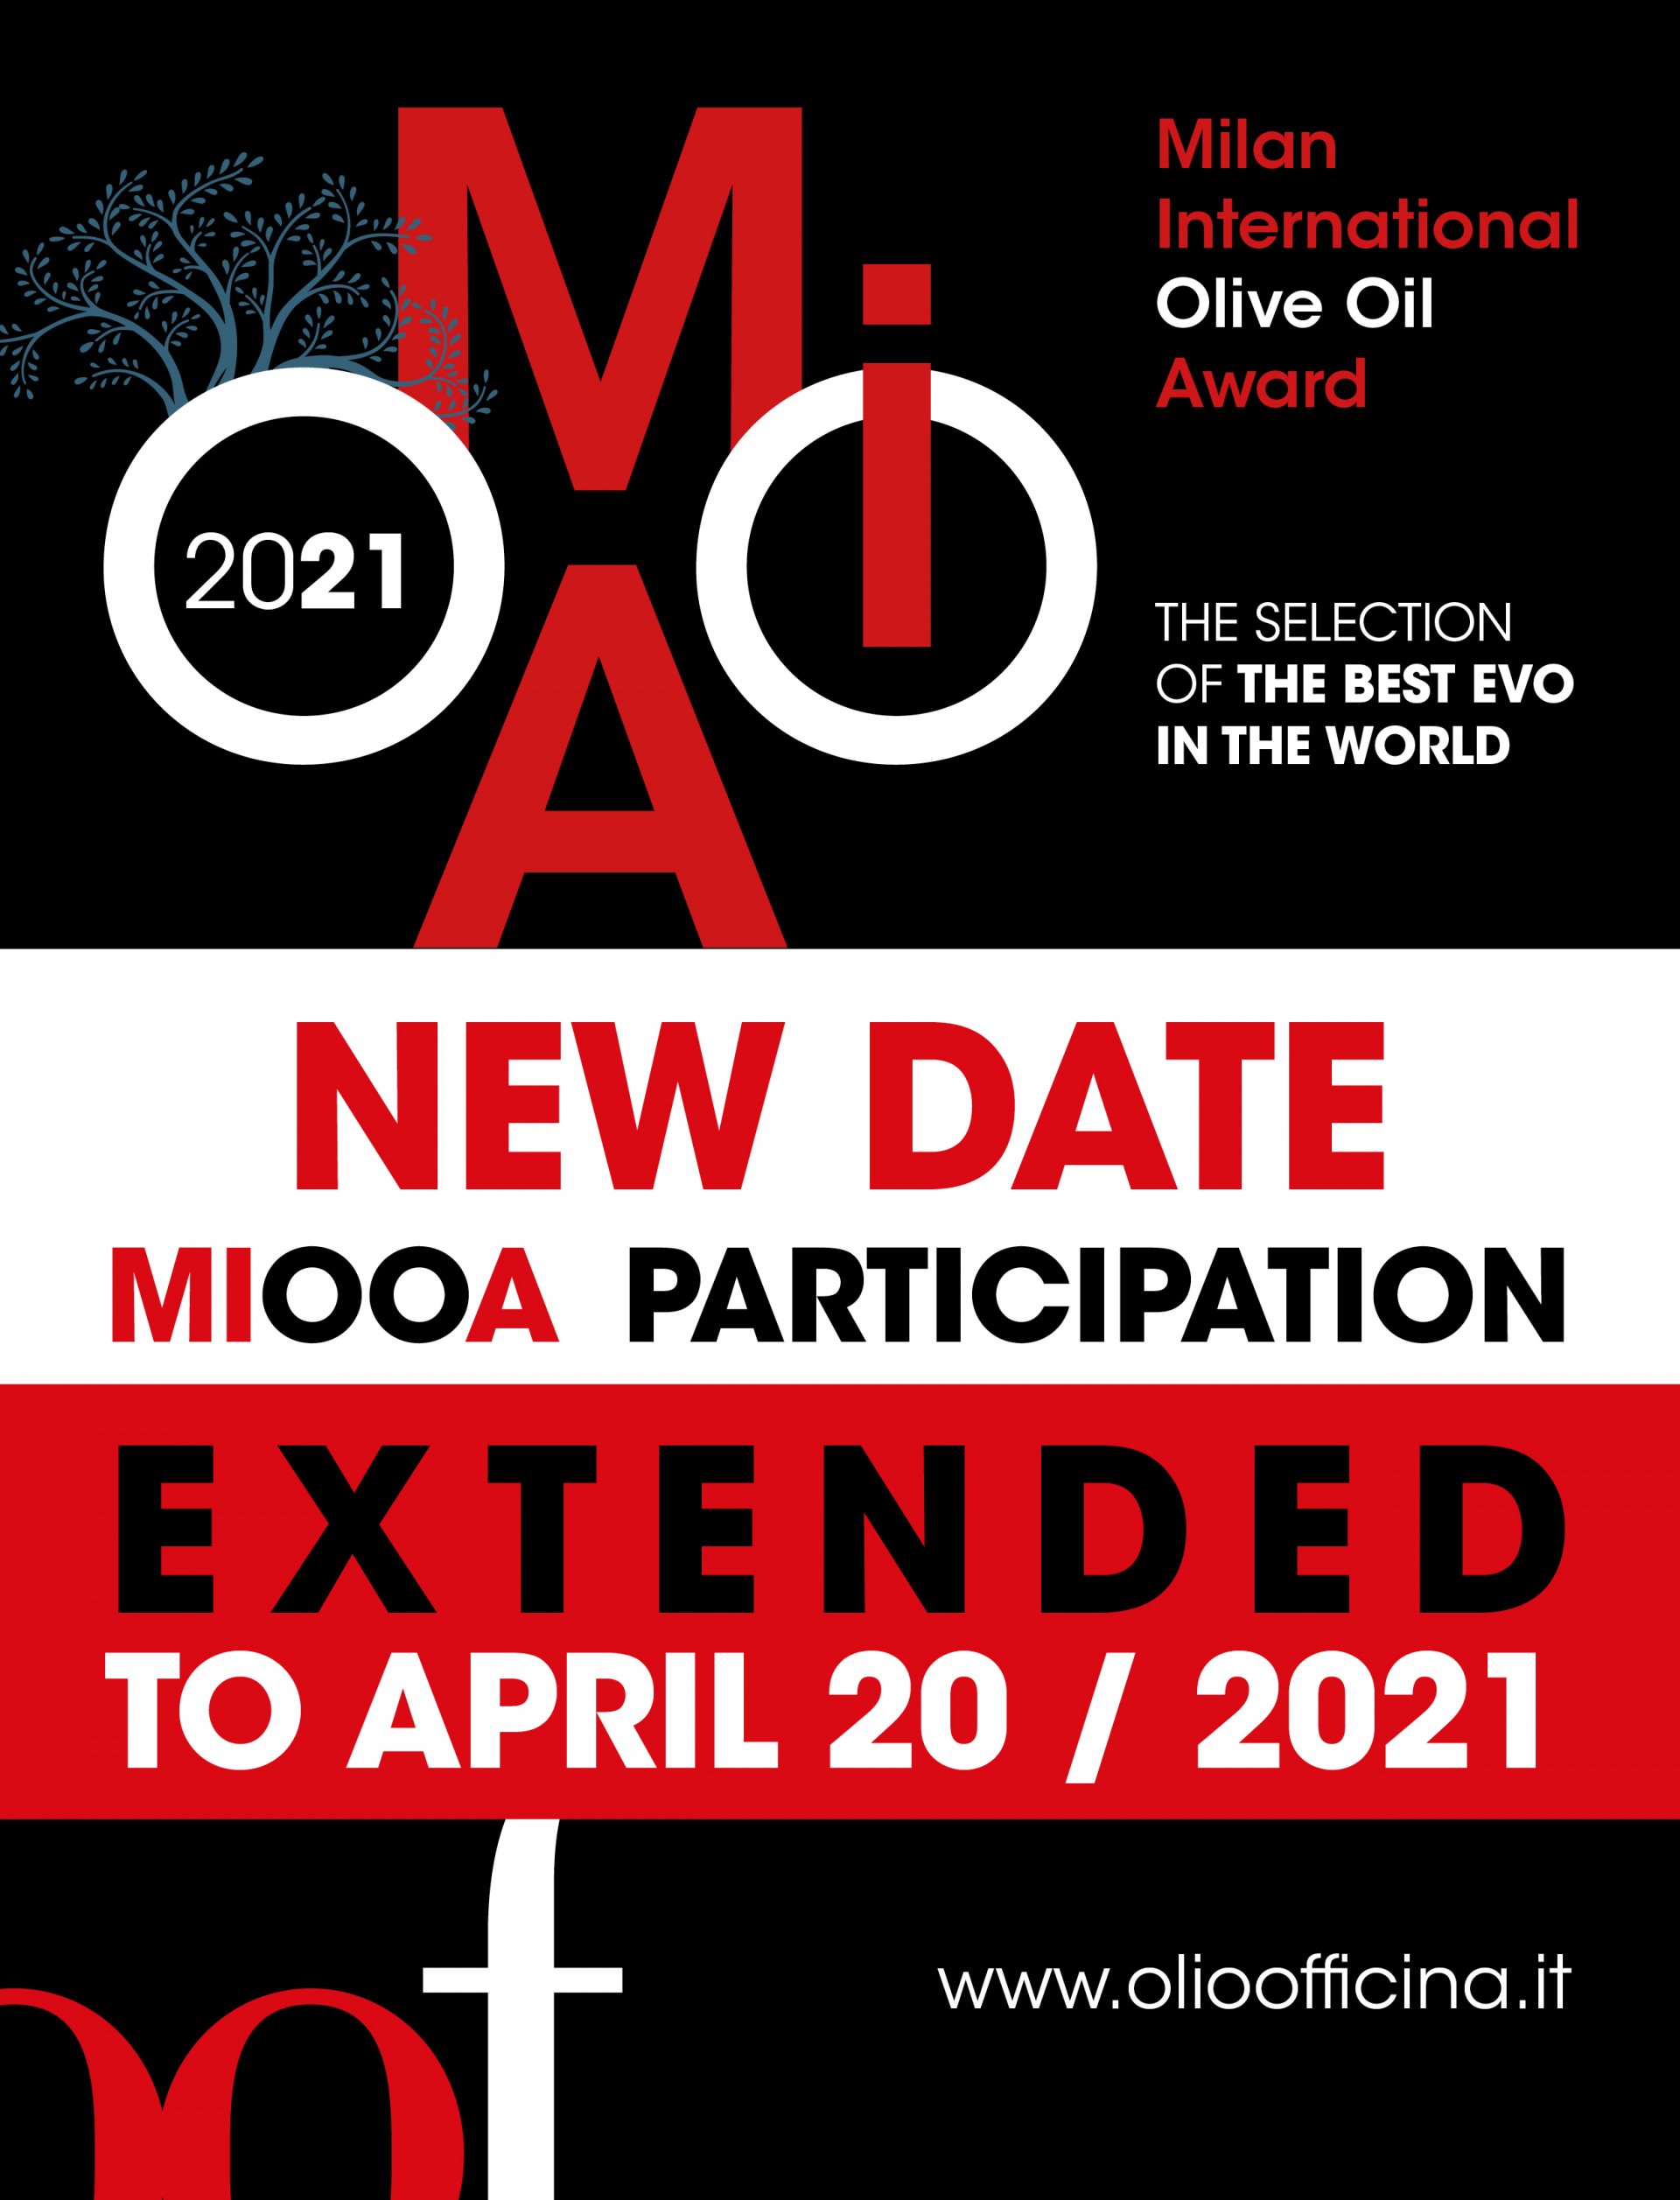 Last days to participate in the Milan International Olive Oil Award